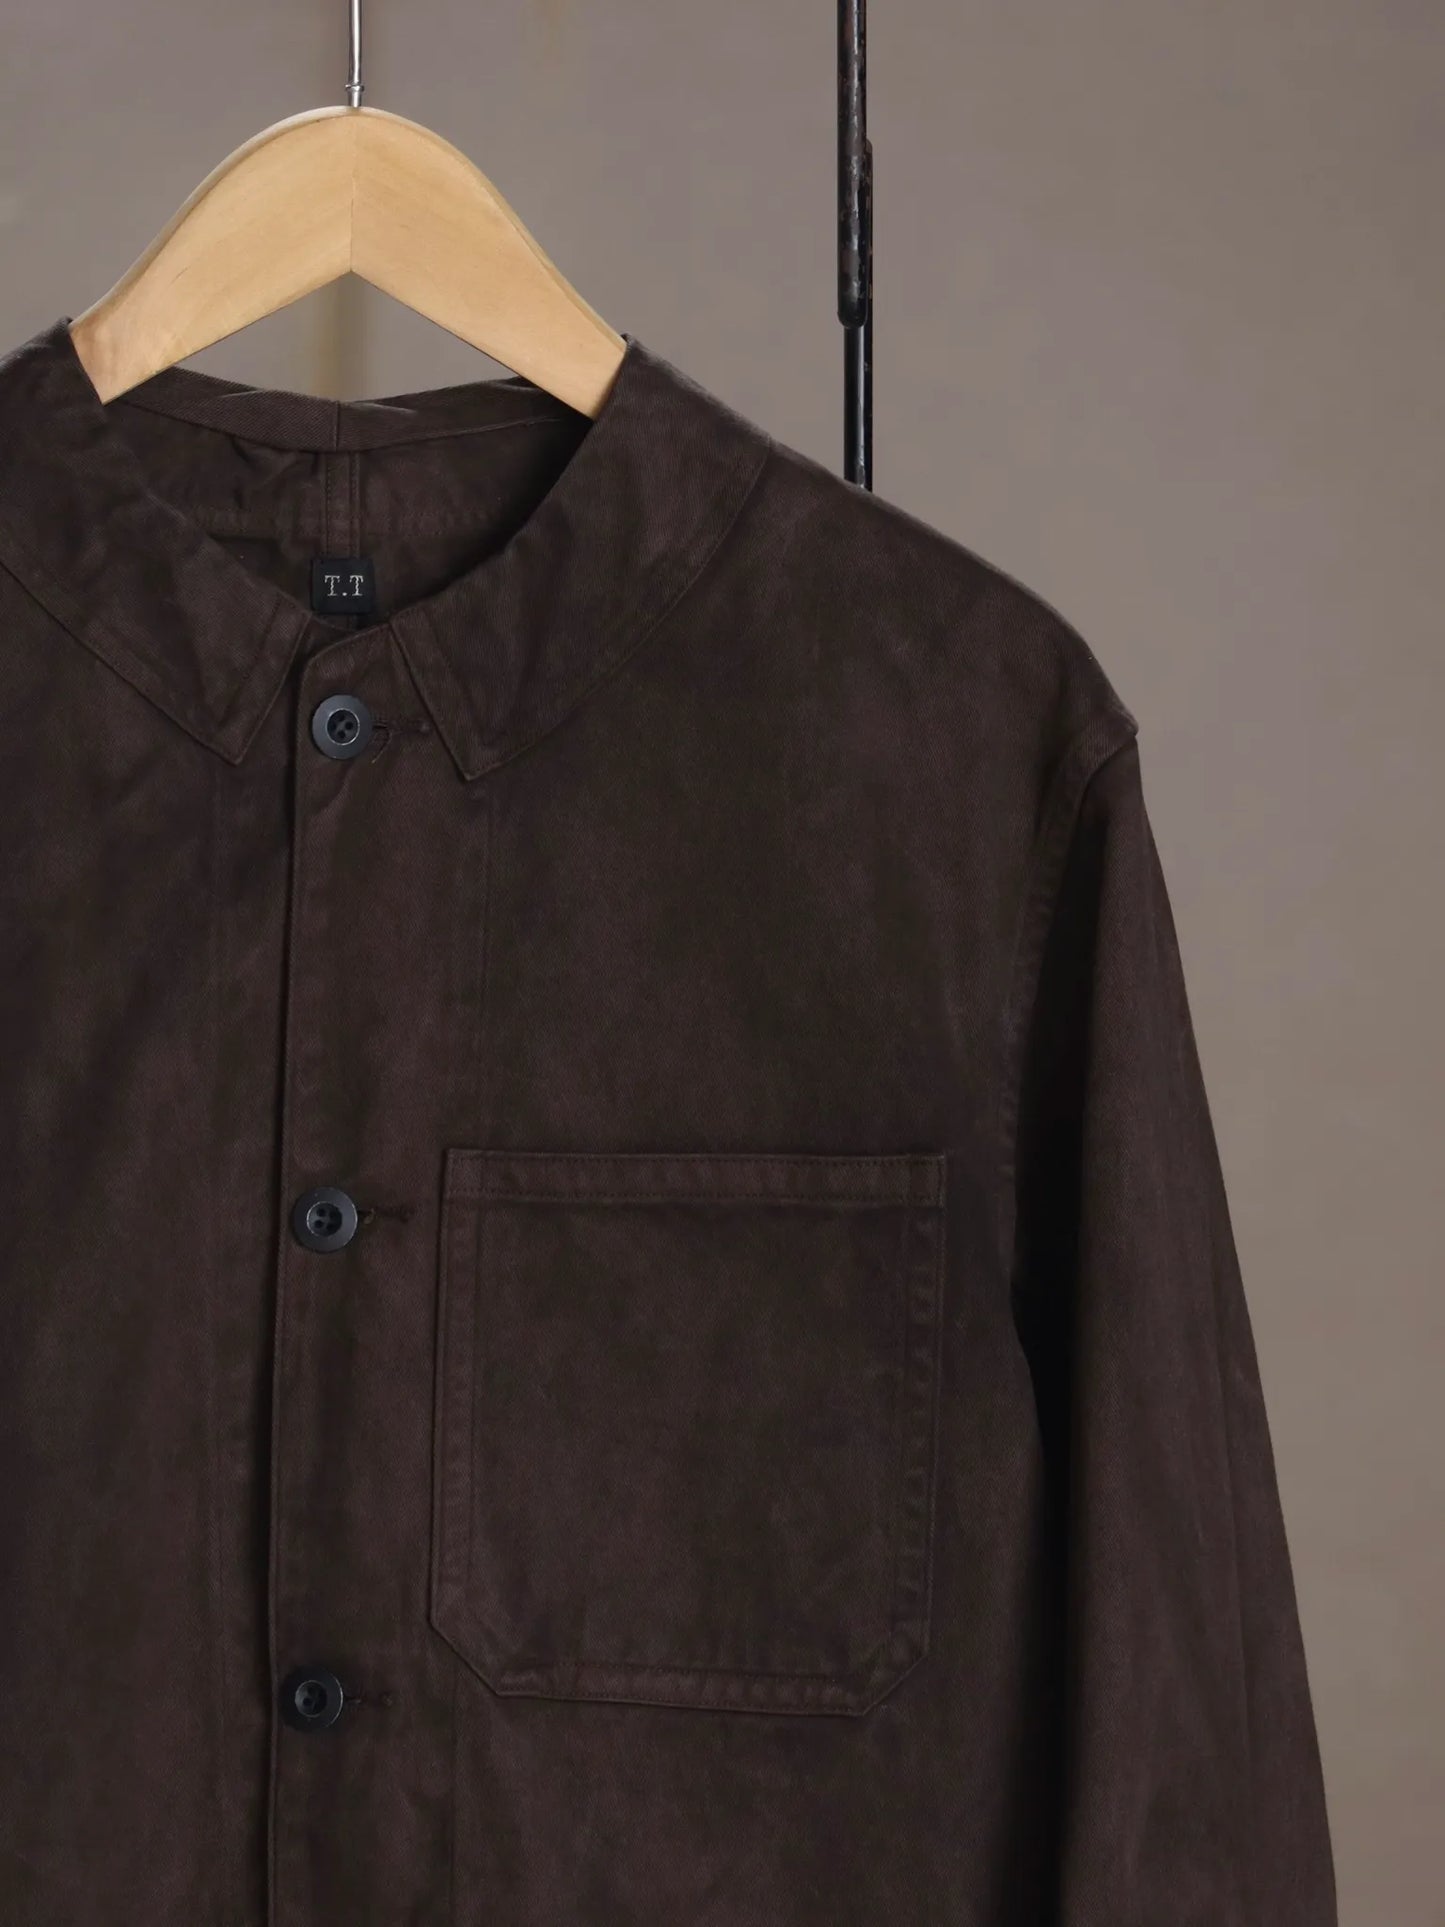 t-t-railroad-jacket-mud-dyed-brown-7